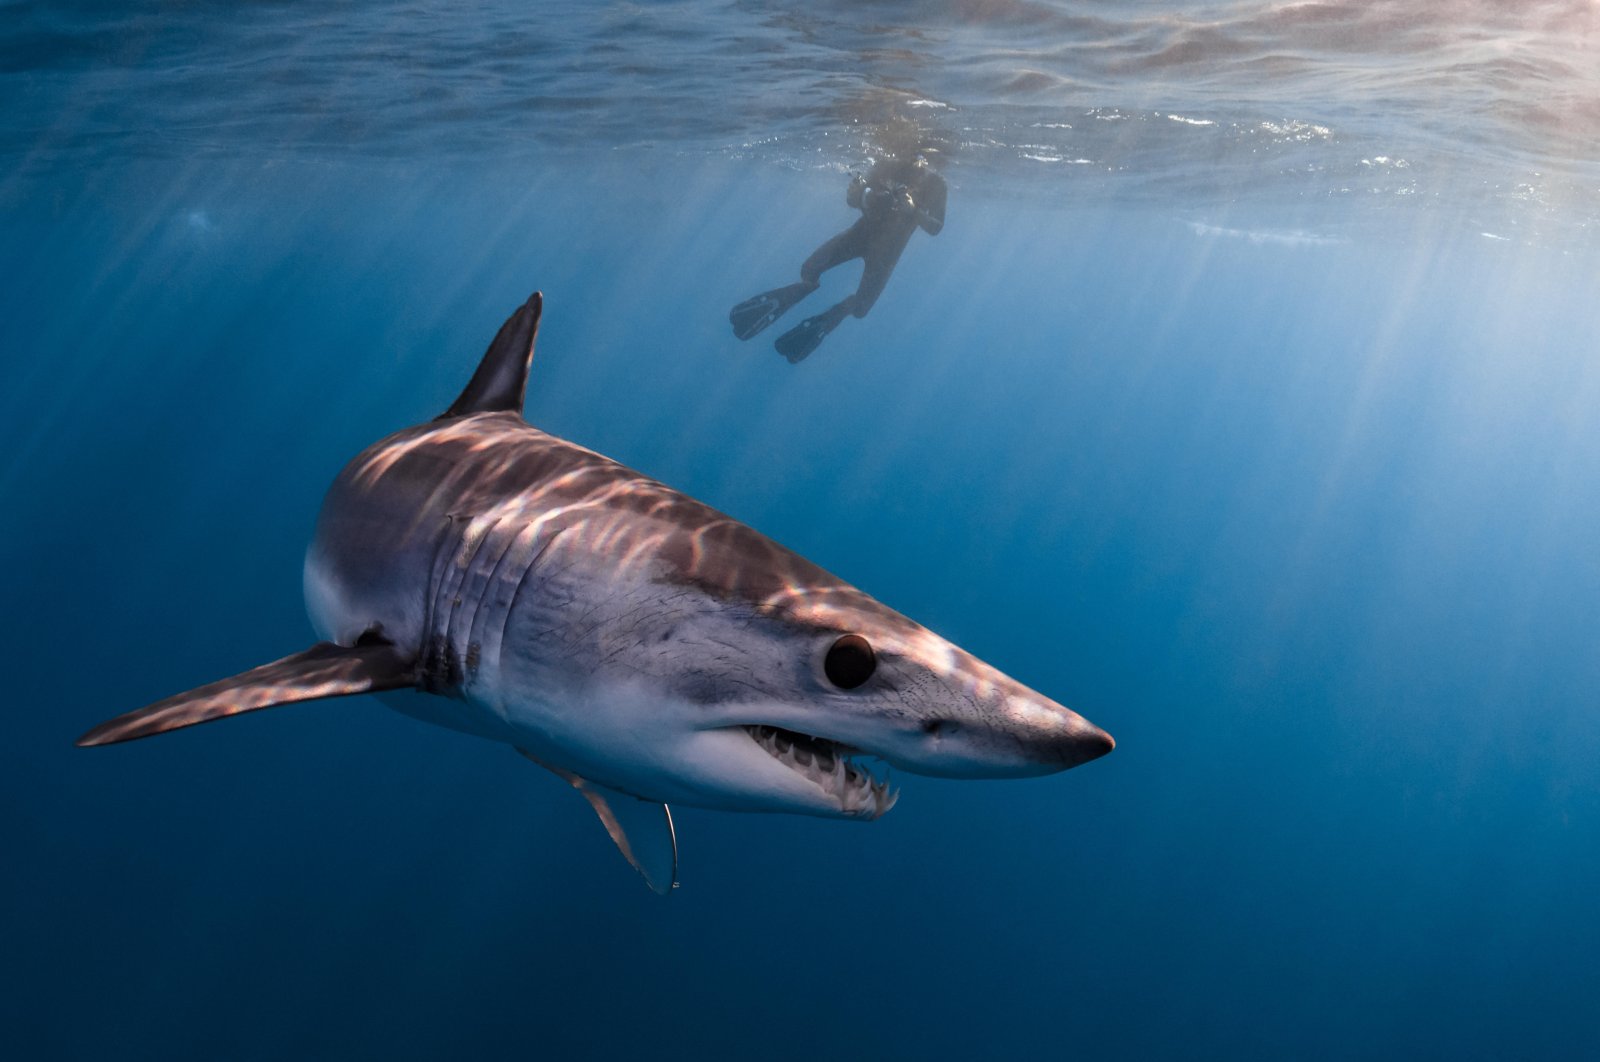 A mako shark swims near a diver in the Pacific Ocean in this undated photo. (Alamy Photo via Reuters)